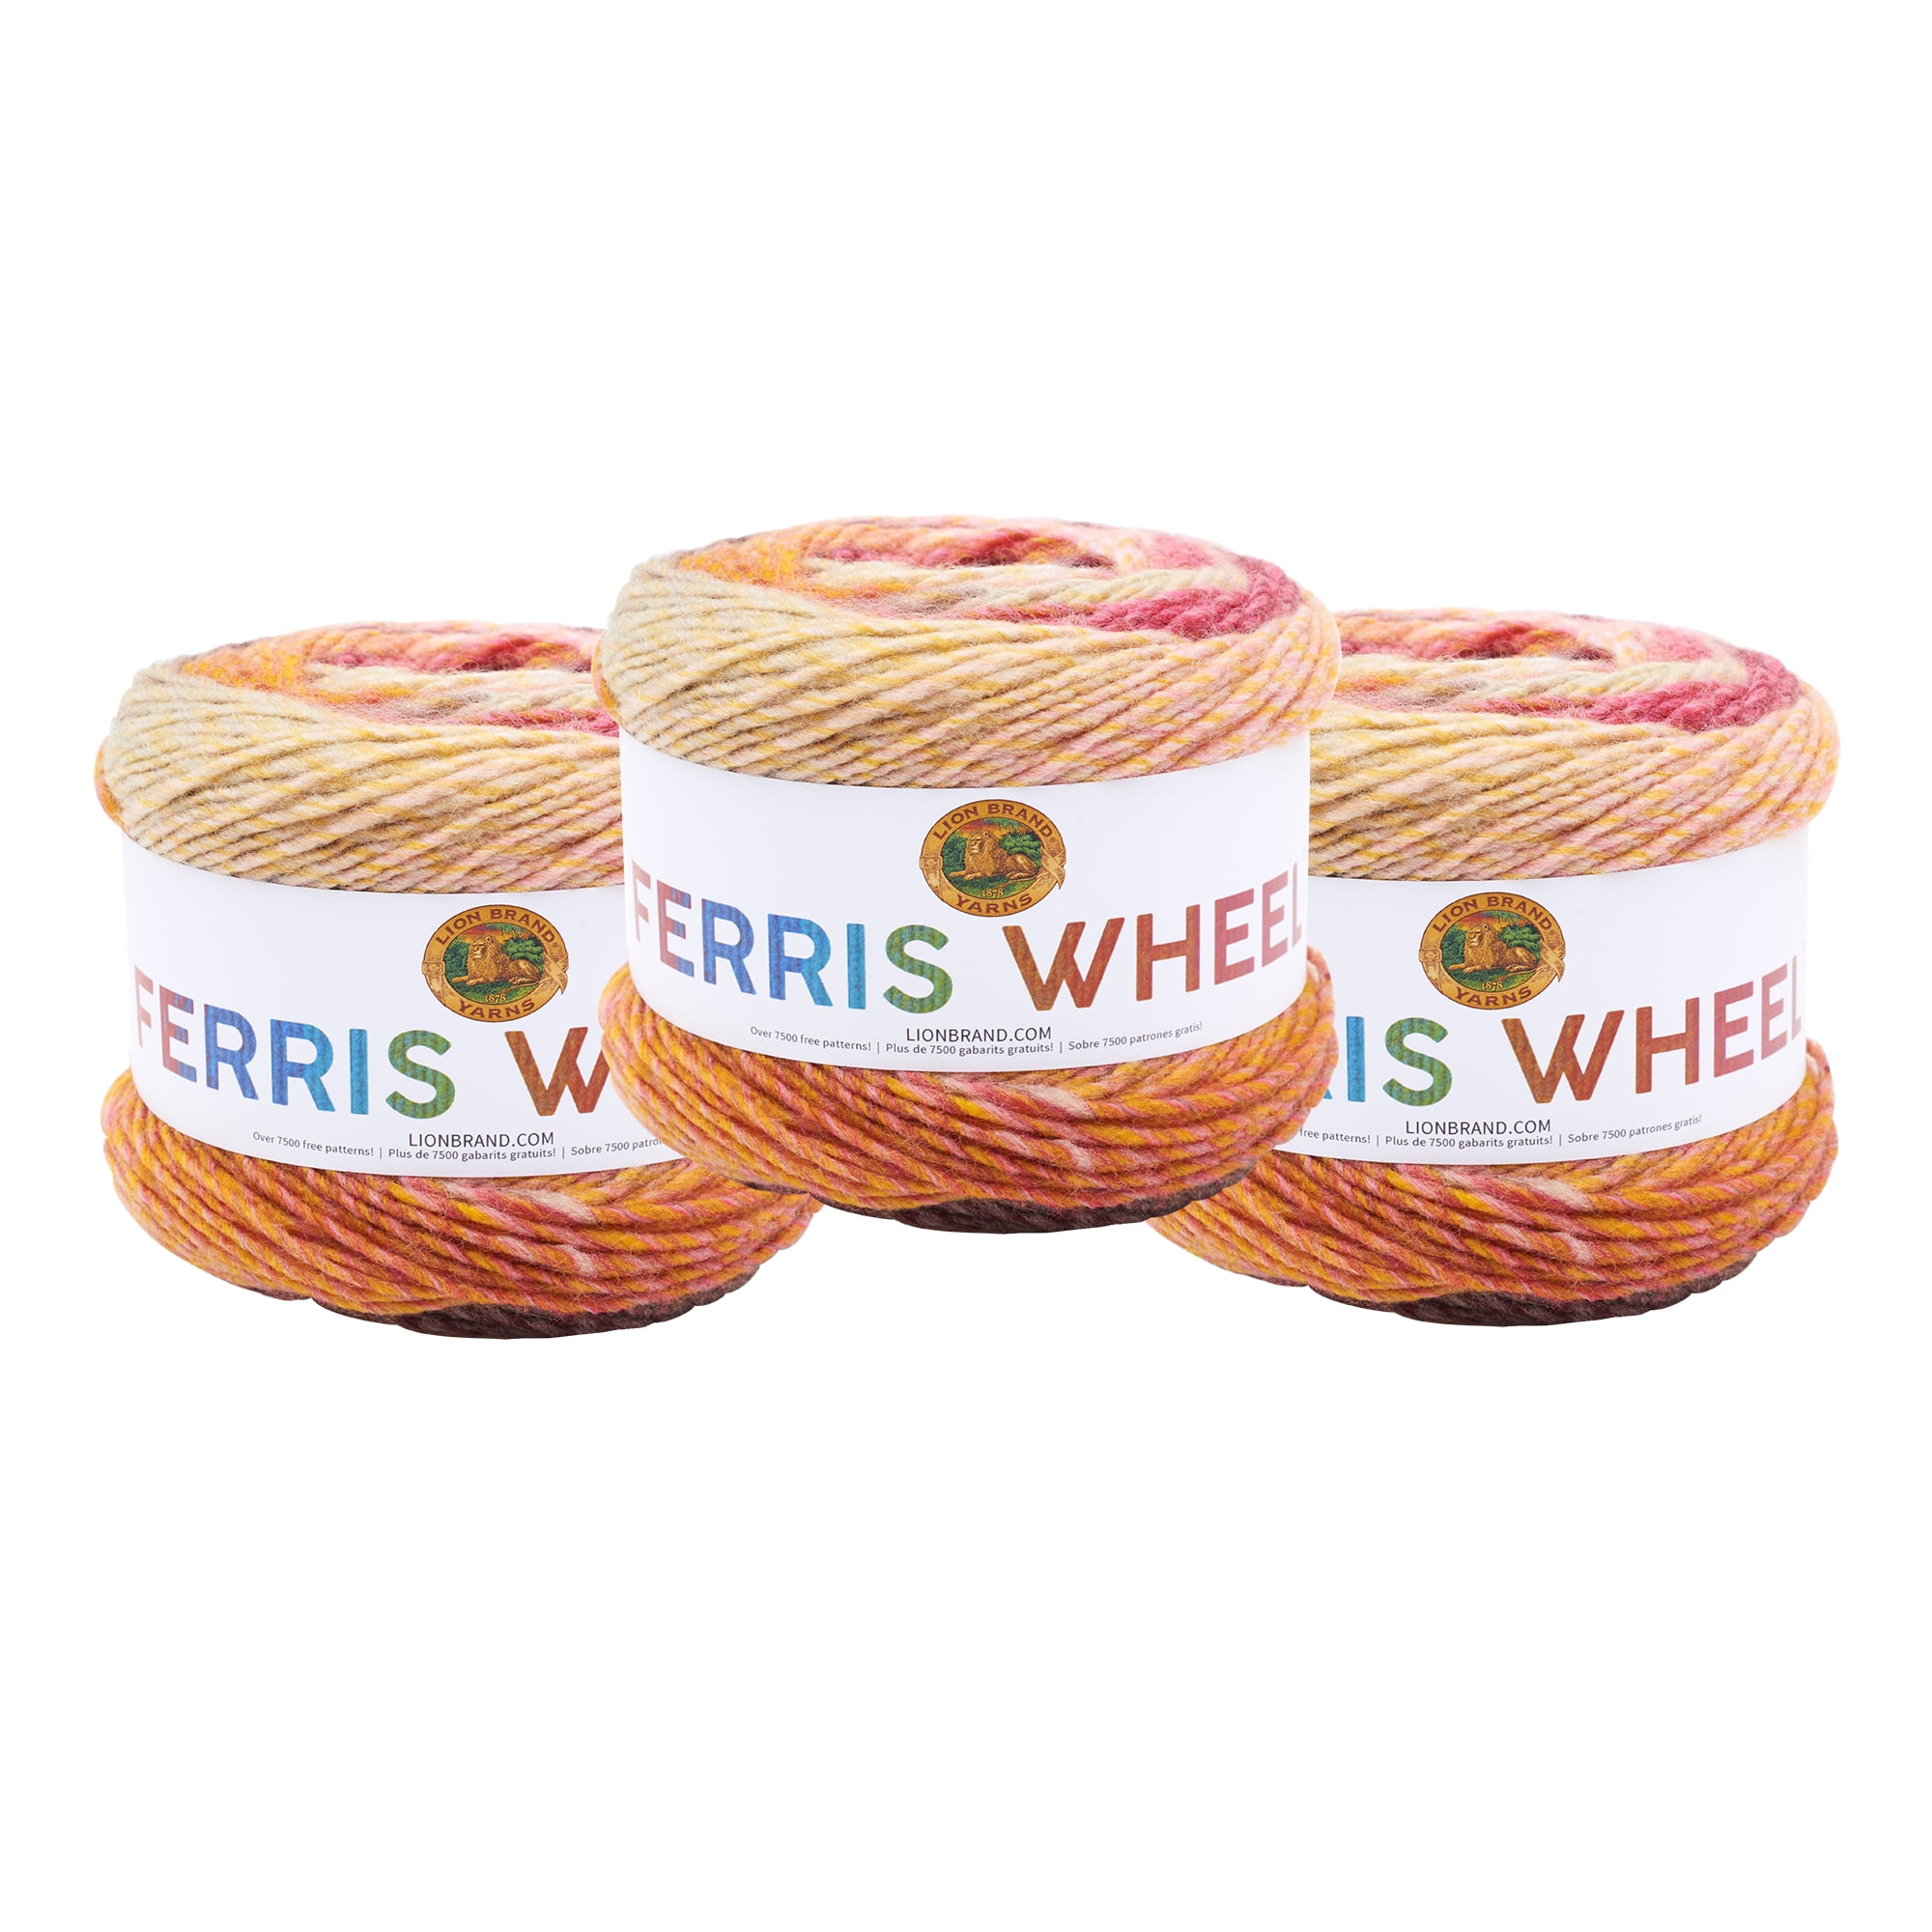 Lion Brand Yarn Ferris Wheel Yarn, Multicolor Yarn for Knitting,  Crocheting, and Crafts, 1-Pack, Buttercup